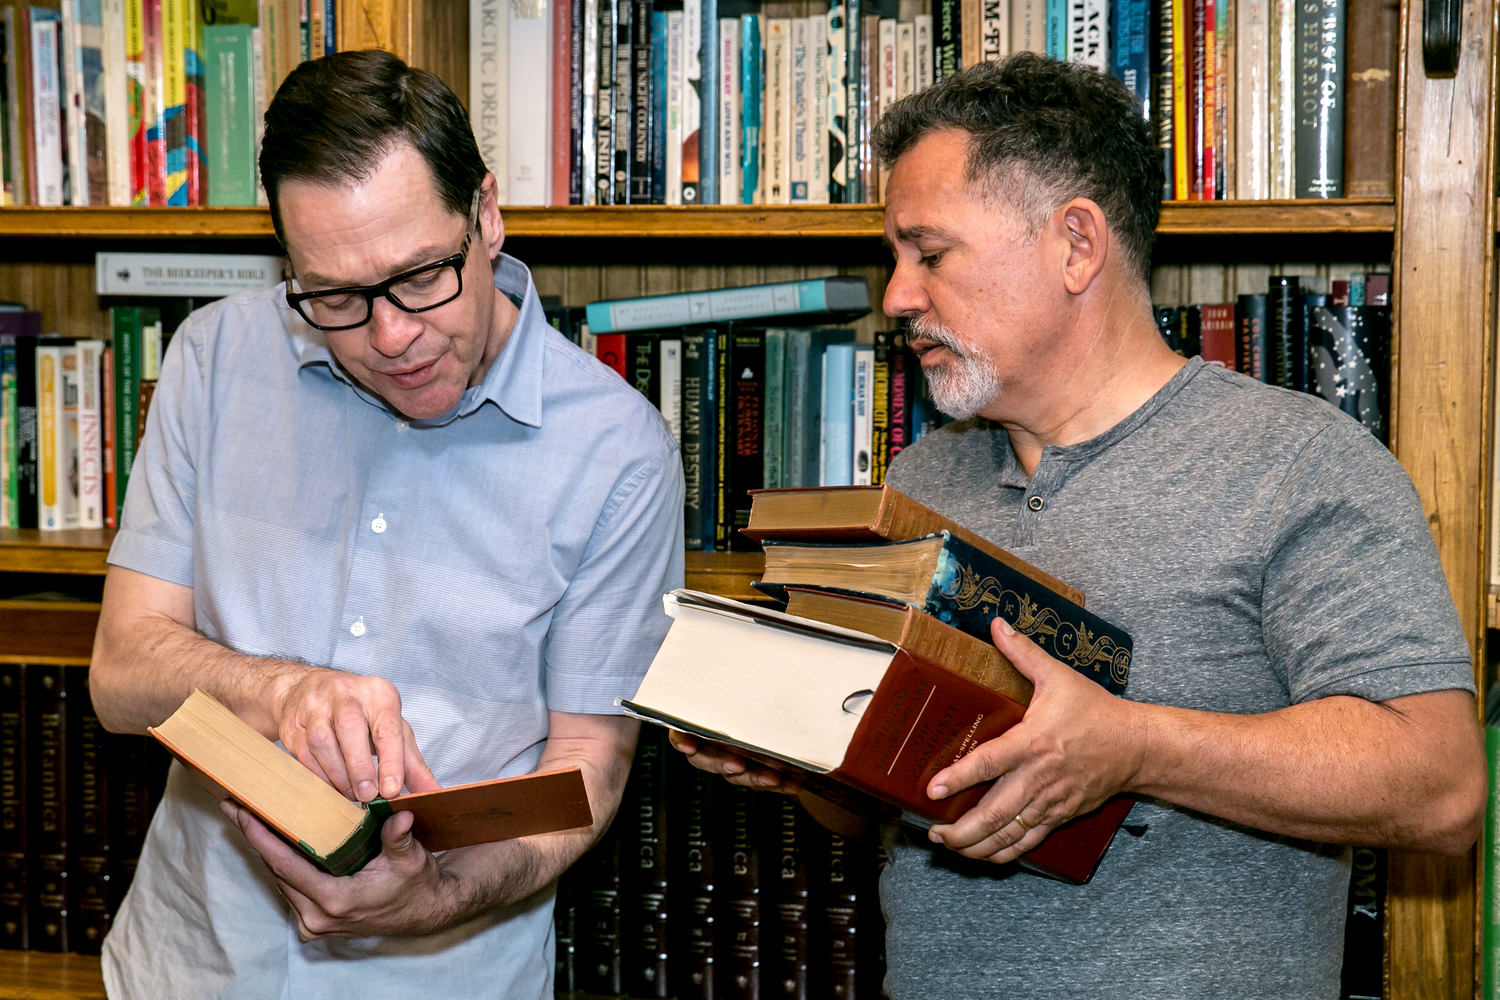 French Stewart and Steve Apostolina star in this play about a rare book dealer's desperate scheme to avoid bankruptcy goes shockingly awry in this darkly funny literary thriller with a surprise twist.